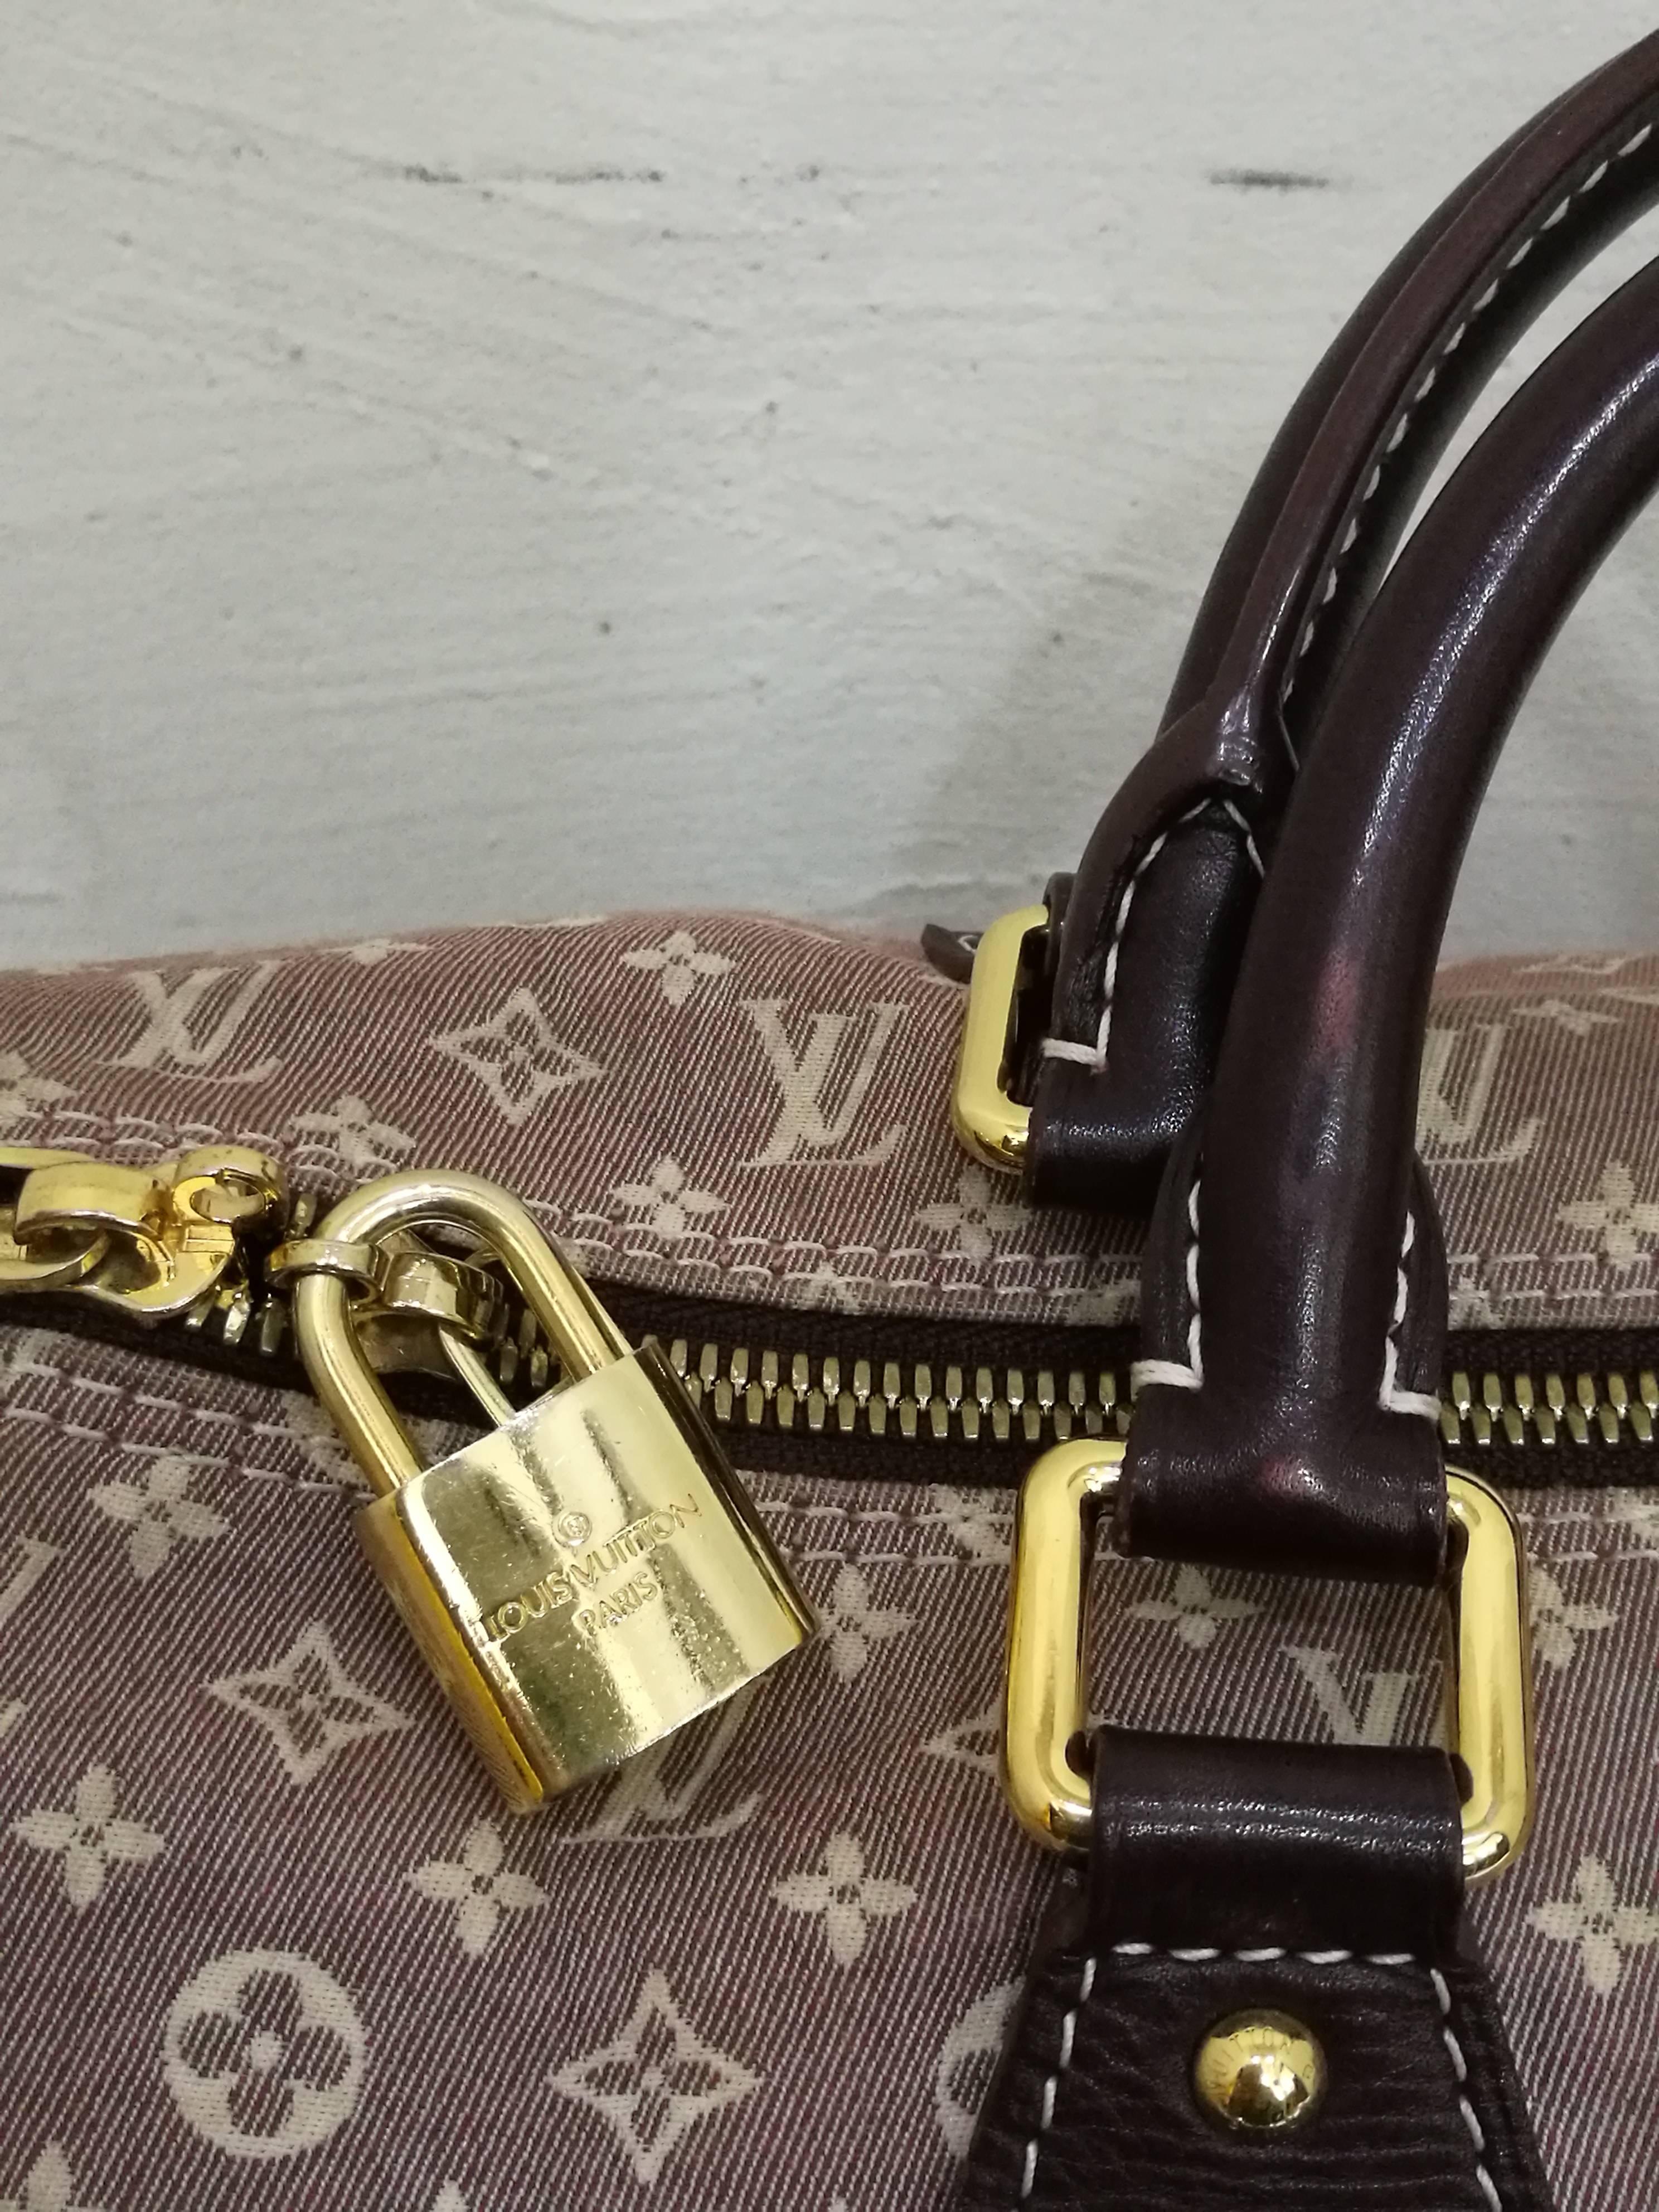 A sporty and sophisticated blend makes this Louis Vuitton Sepia Monogram Idylle Speedy 30 Bag truly desirable. With its ultra-spacious interior and zip closure with padlock, you can lock up all your precious belongings and take it everywhere you go.